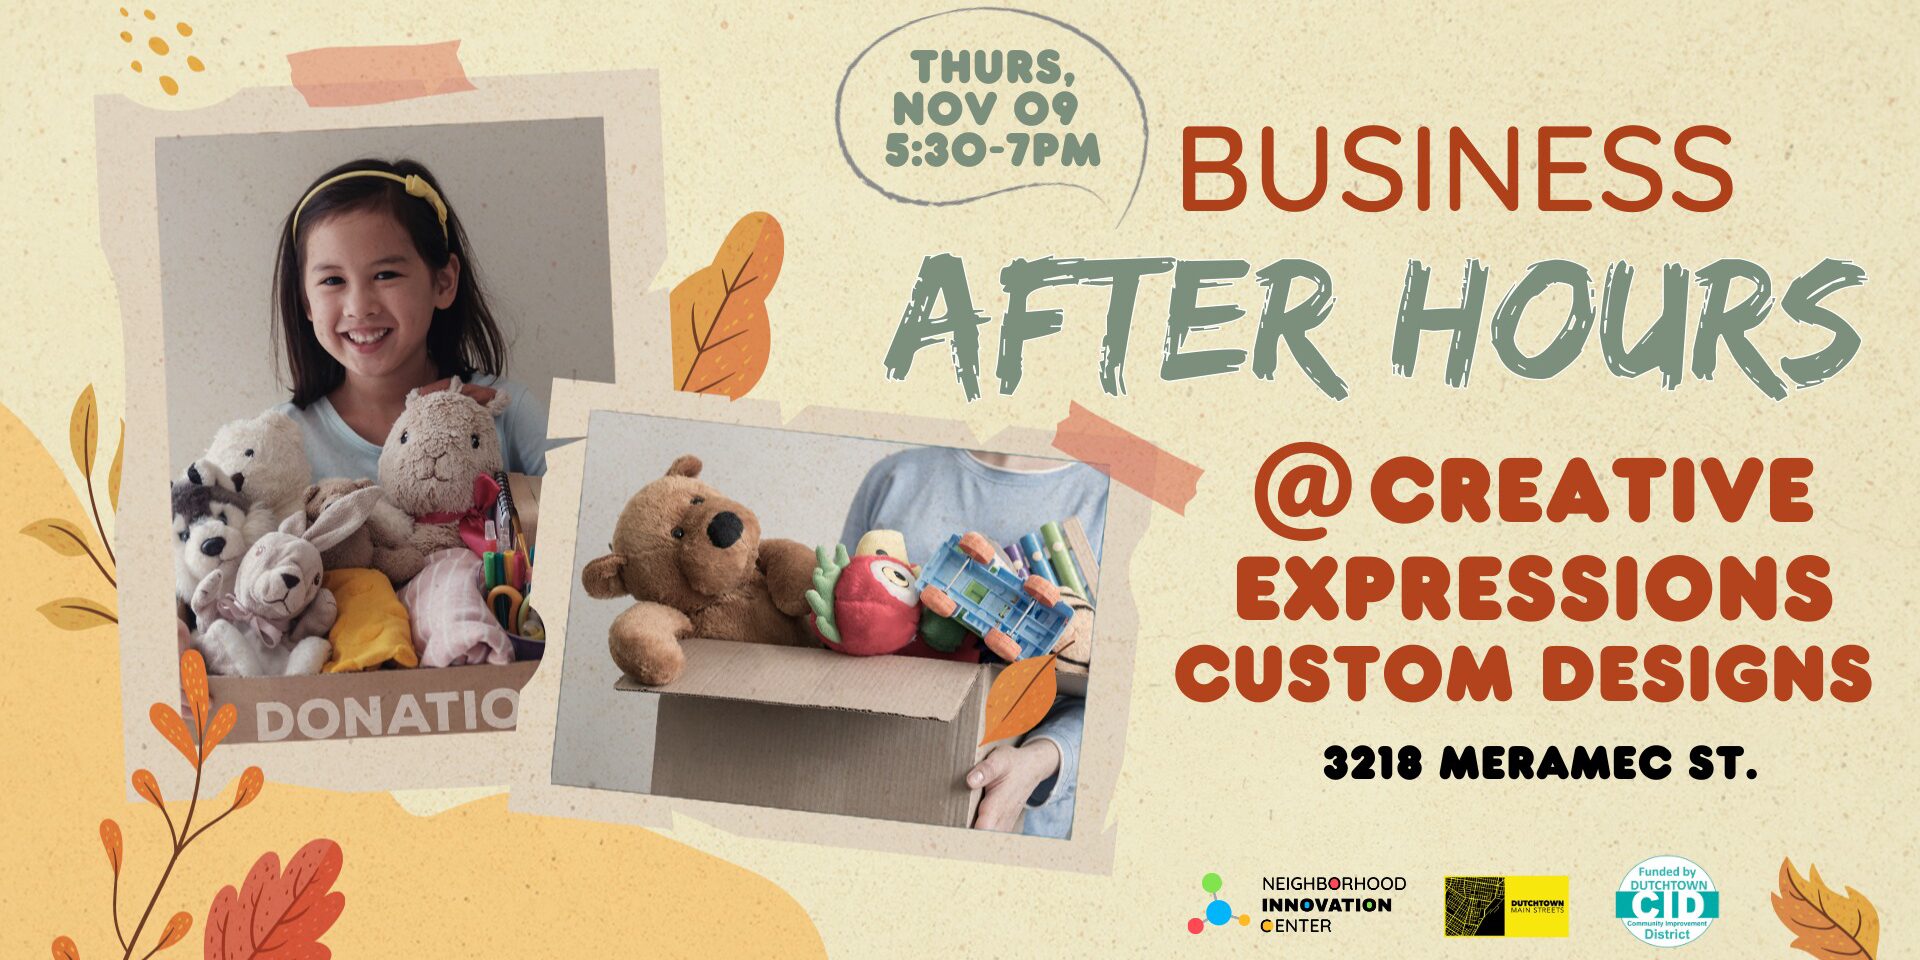 Dutchtown Business After Hours at Creative Expressions Custom Designs